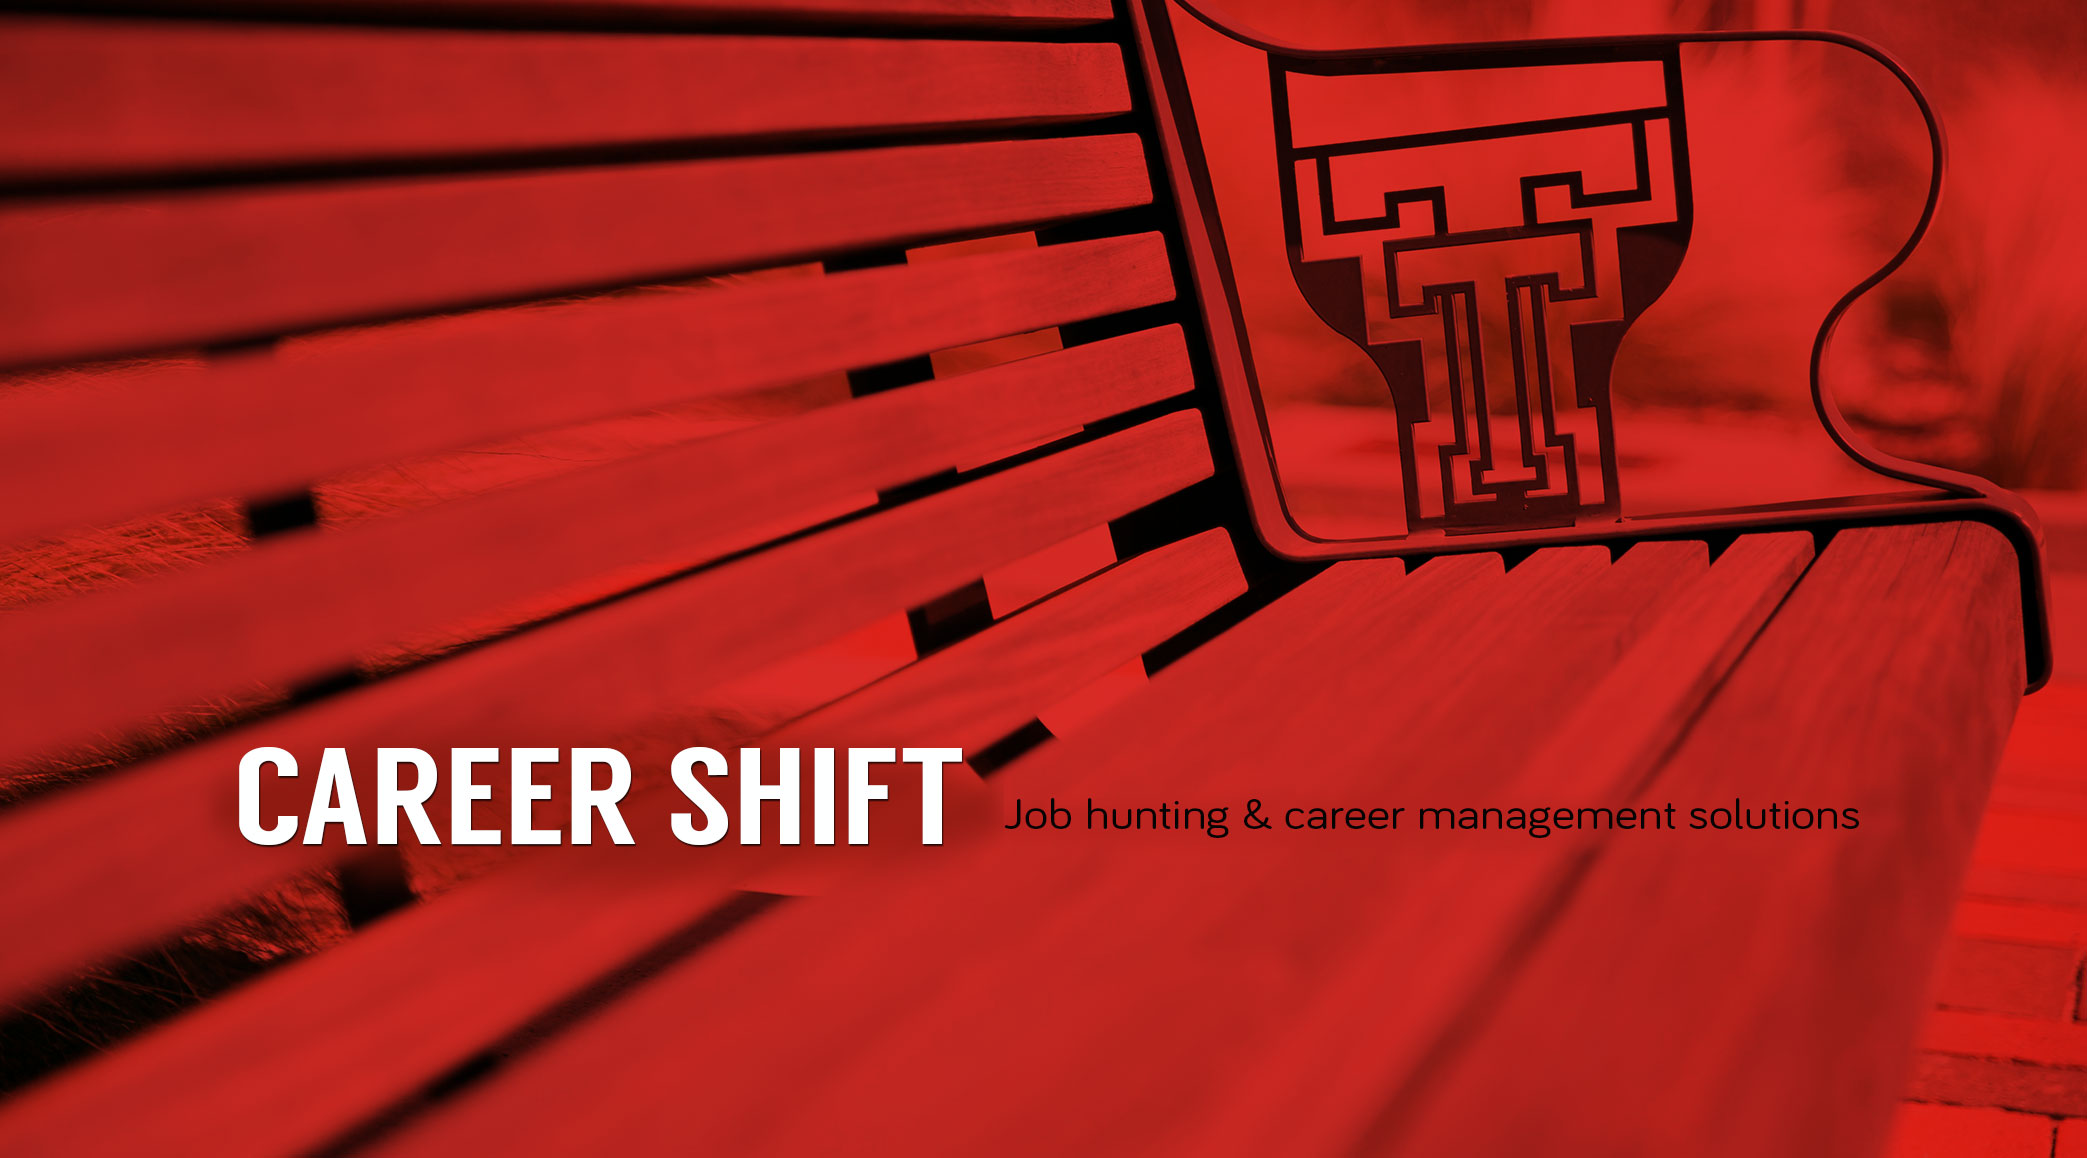 Use CareerShift, a job hunting and career management solution, to search, store & record job listings from all publicly posted websites, company websites, & newspapers!